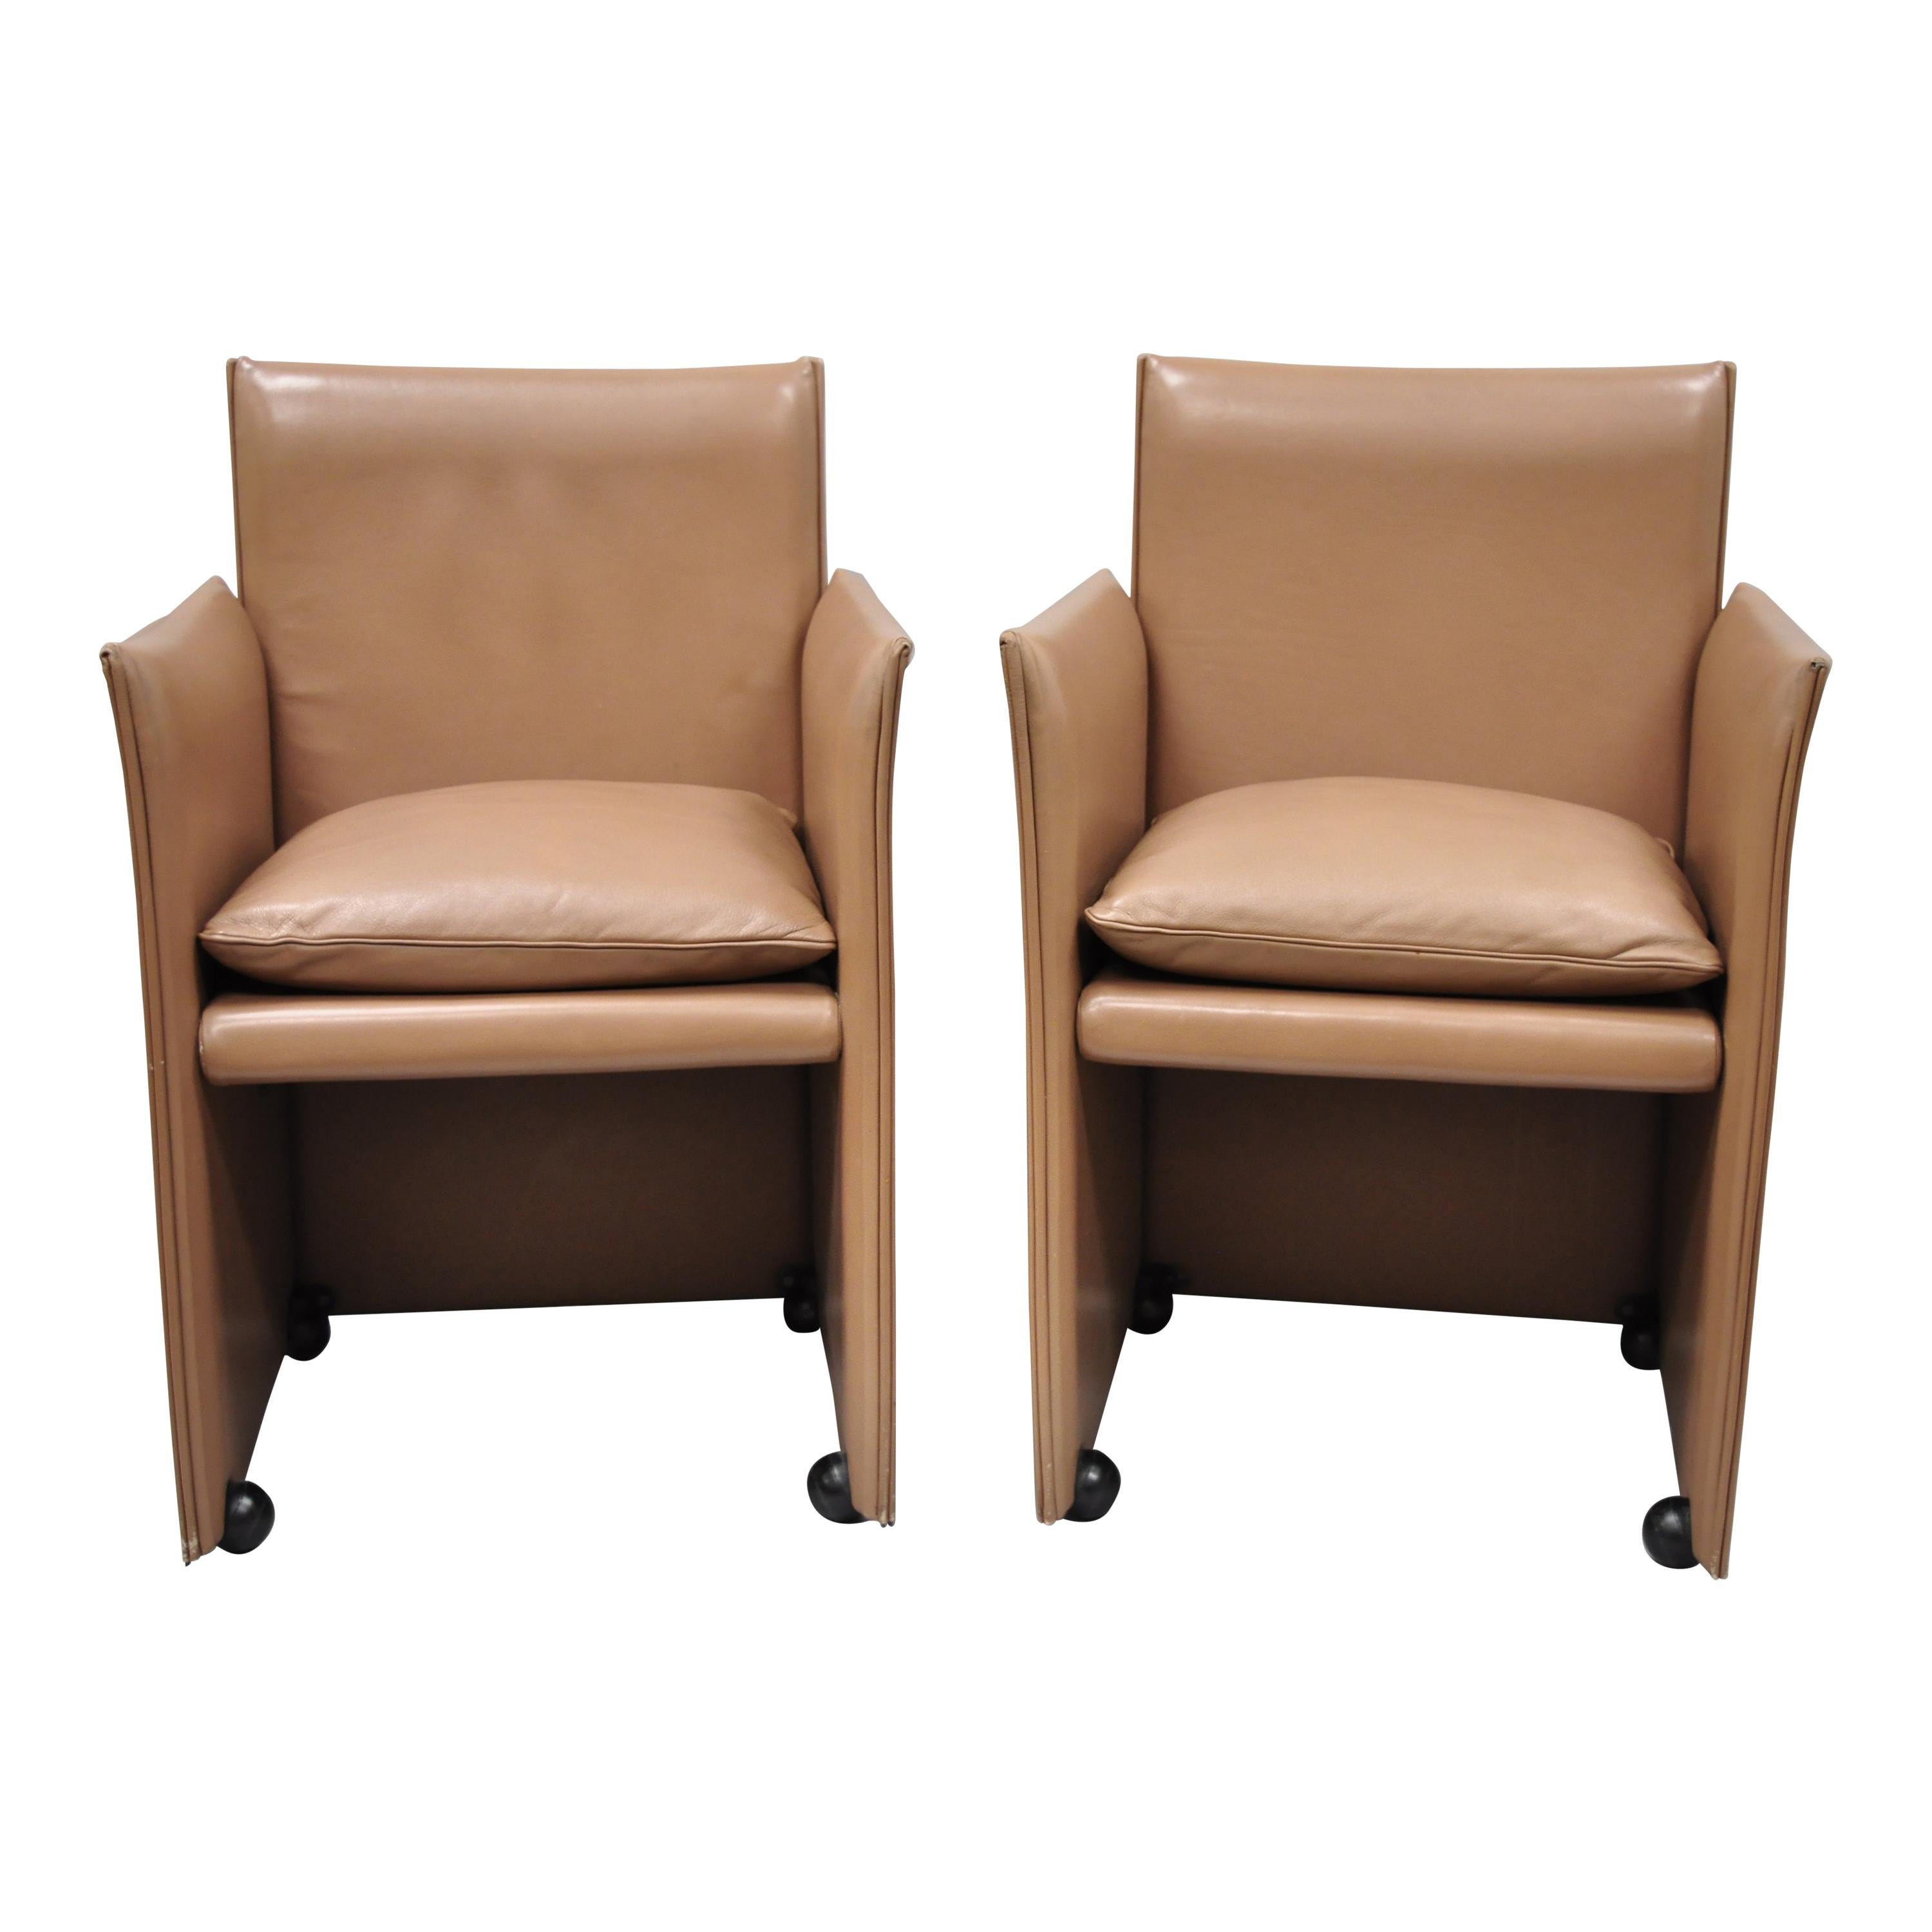 Pair of 401 Break Armchair by Mario Bellini for Cassina Copper Leather For Sale